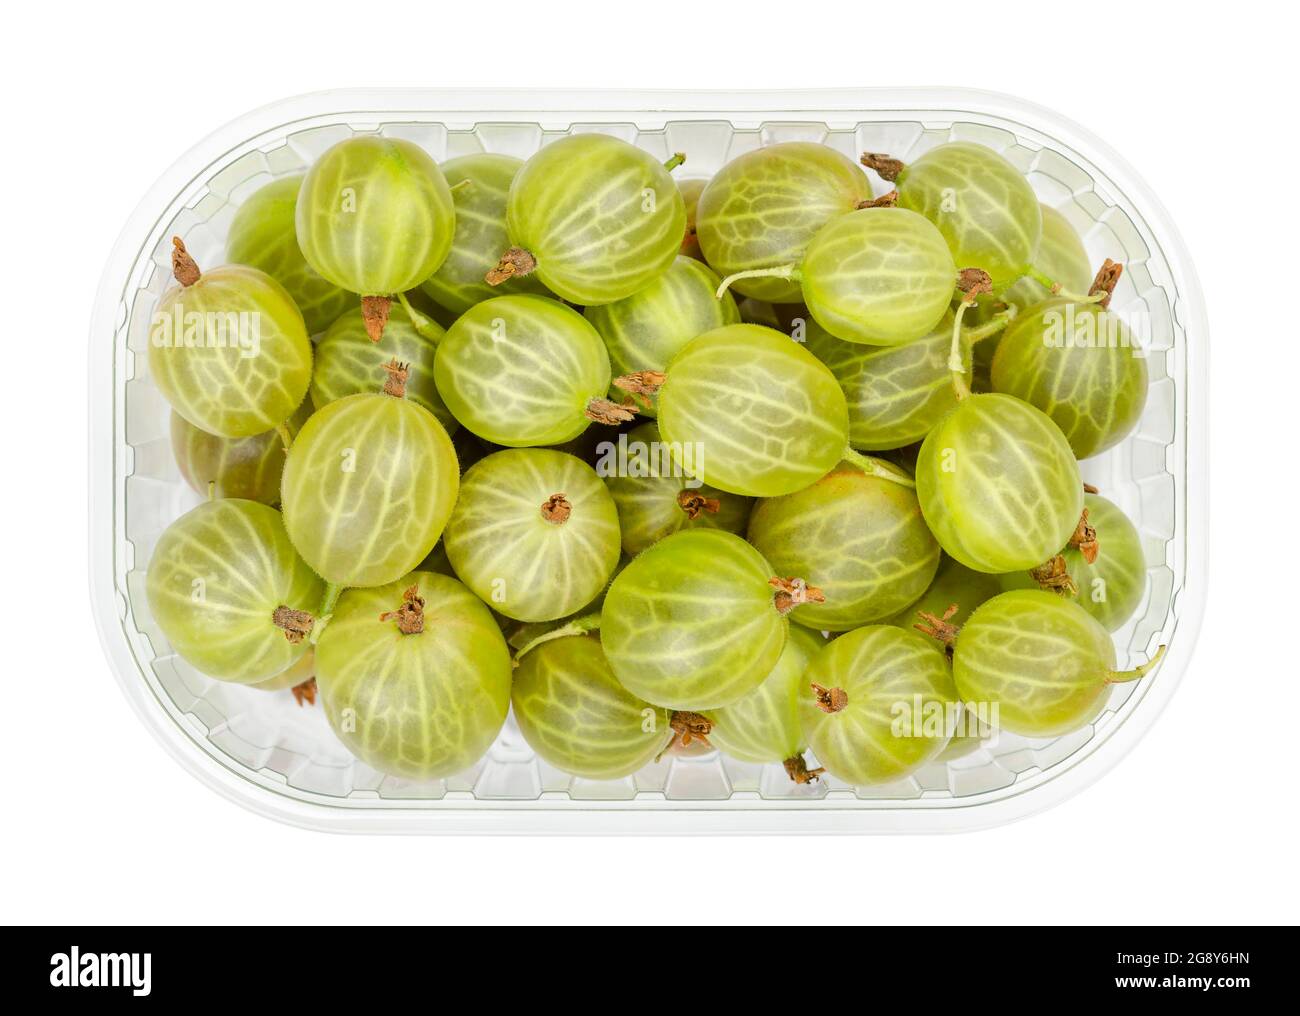 Green gooseberries in a plastic container. Fresh ripe berries, fruits of Ribes, also known as European gooseberry, with sourish sweet taste. Stock Photo